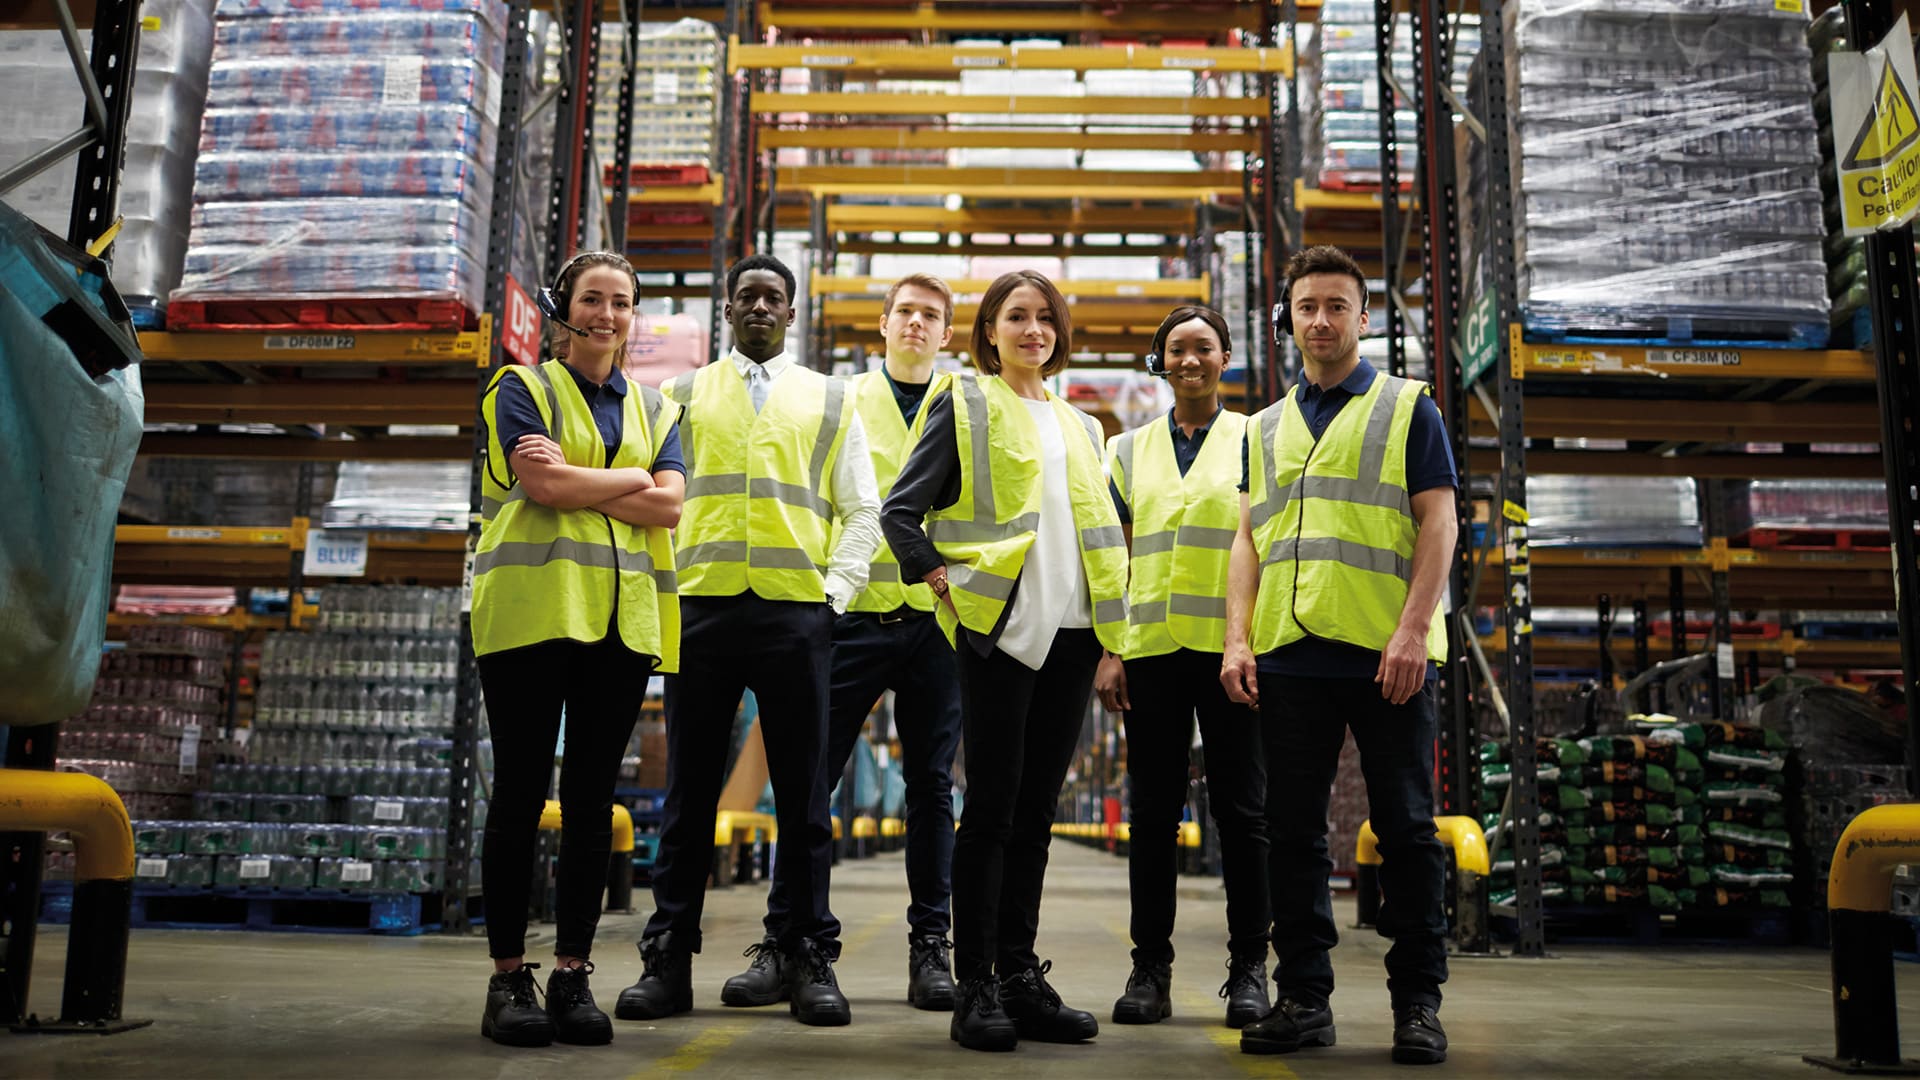 A photo of a group of people in high-vis jackets in a warehouse.